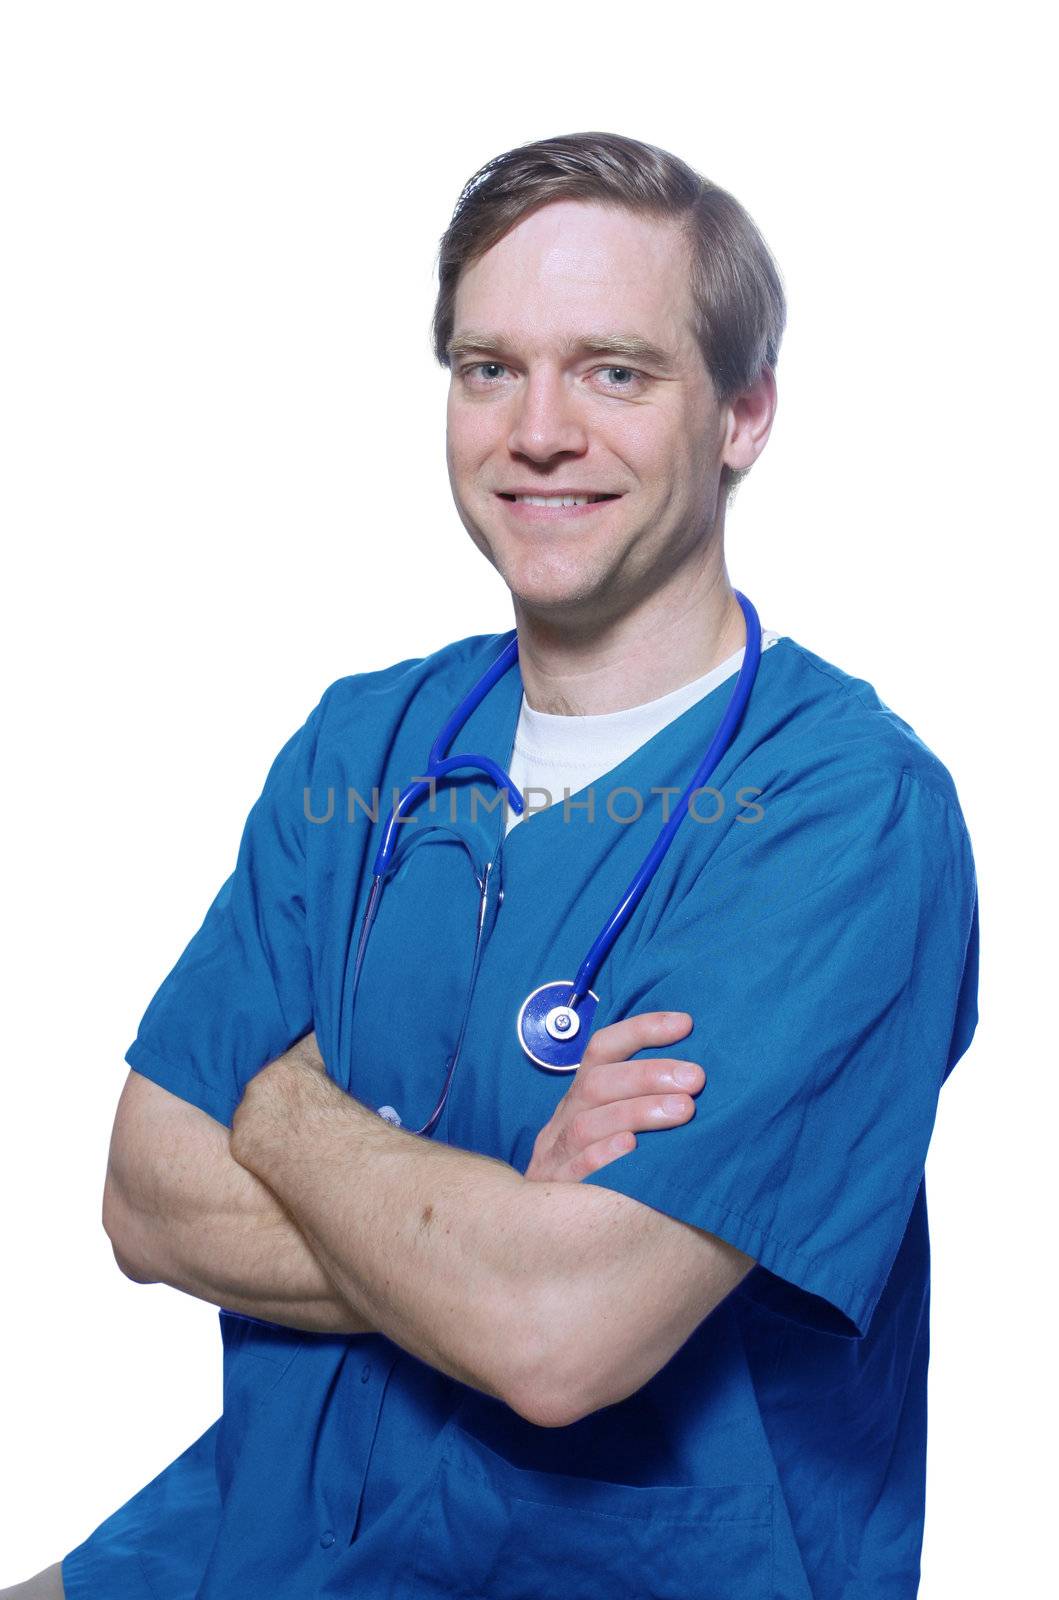 Handsome doctor smiling with arms crossed